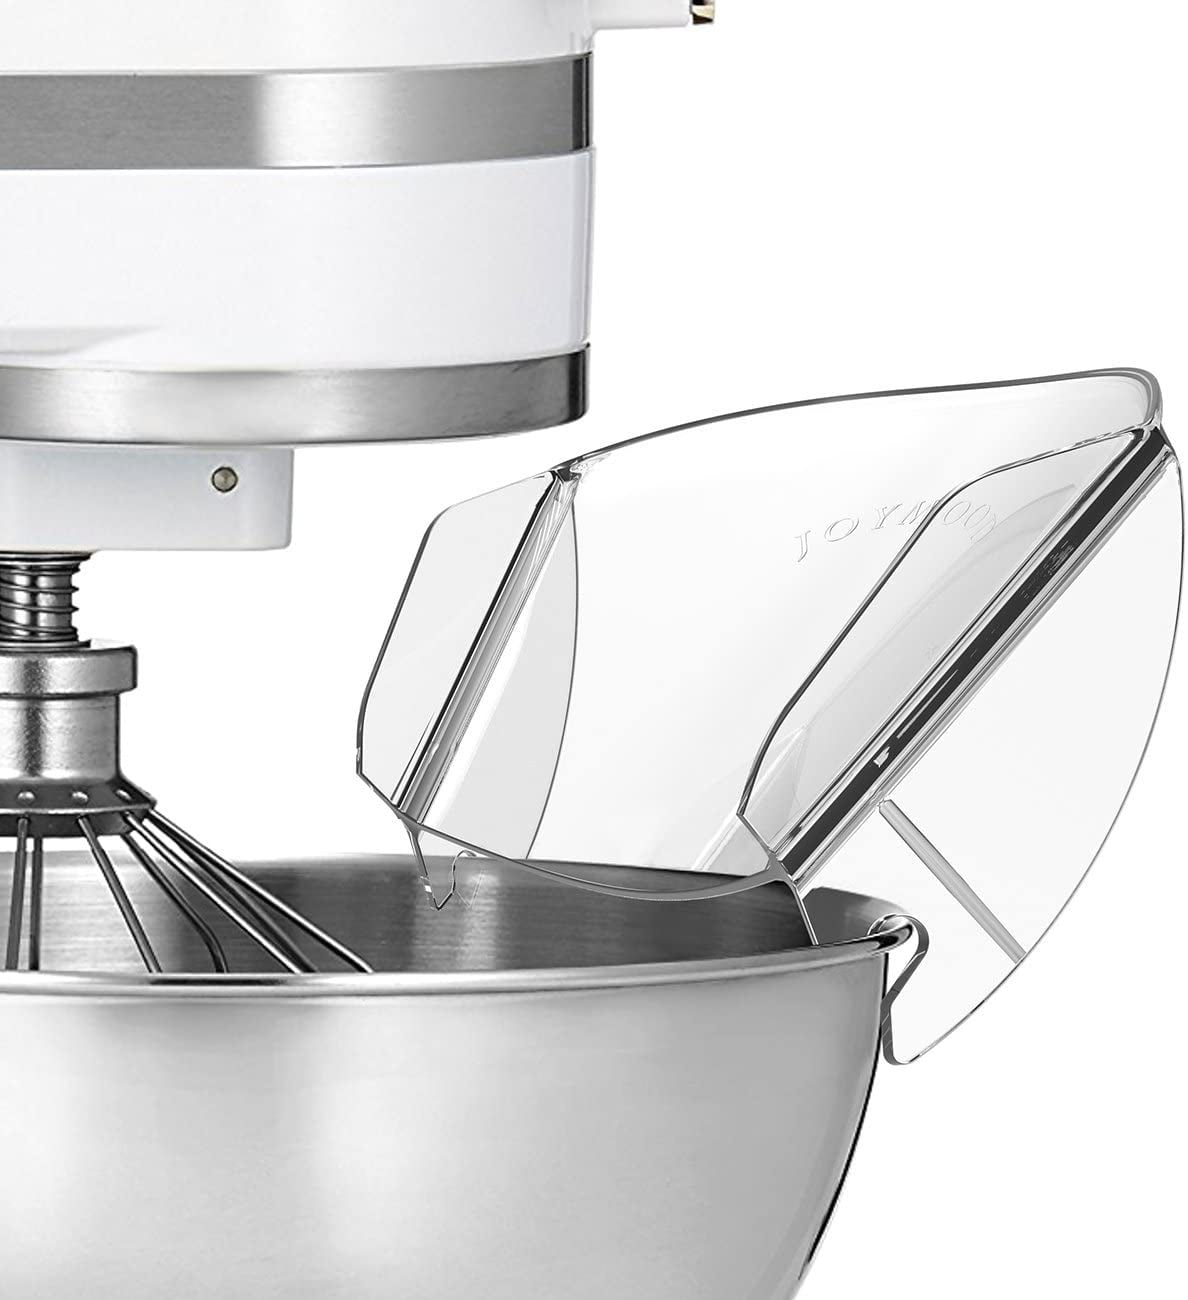 ROYI Pouring Shield, Universal Pouring Chute for Kitchen Aid Bowl-Lift Stand  Mixer Attachment/Accessories (pouringA) 